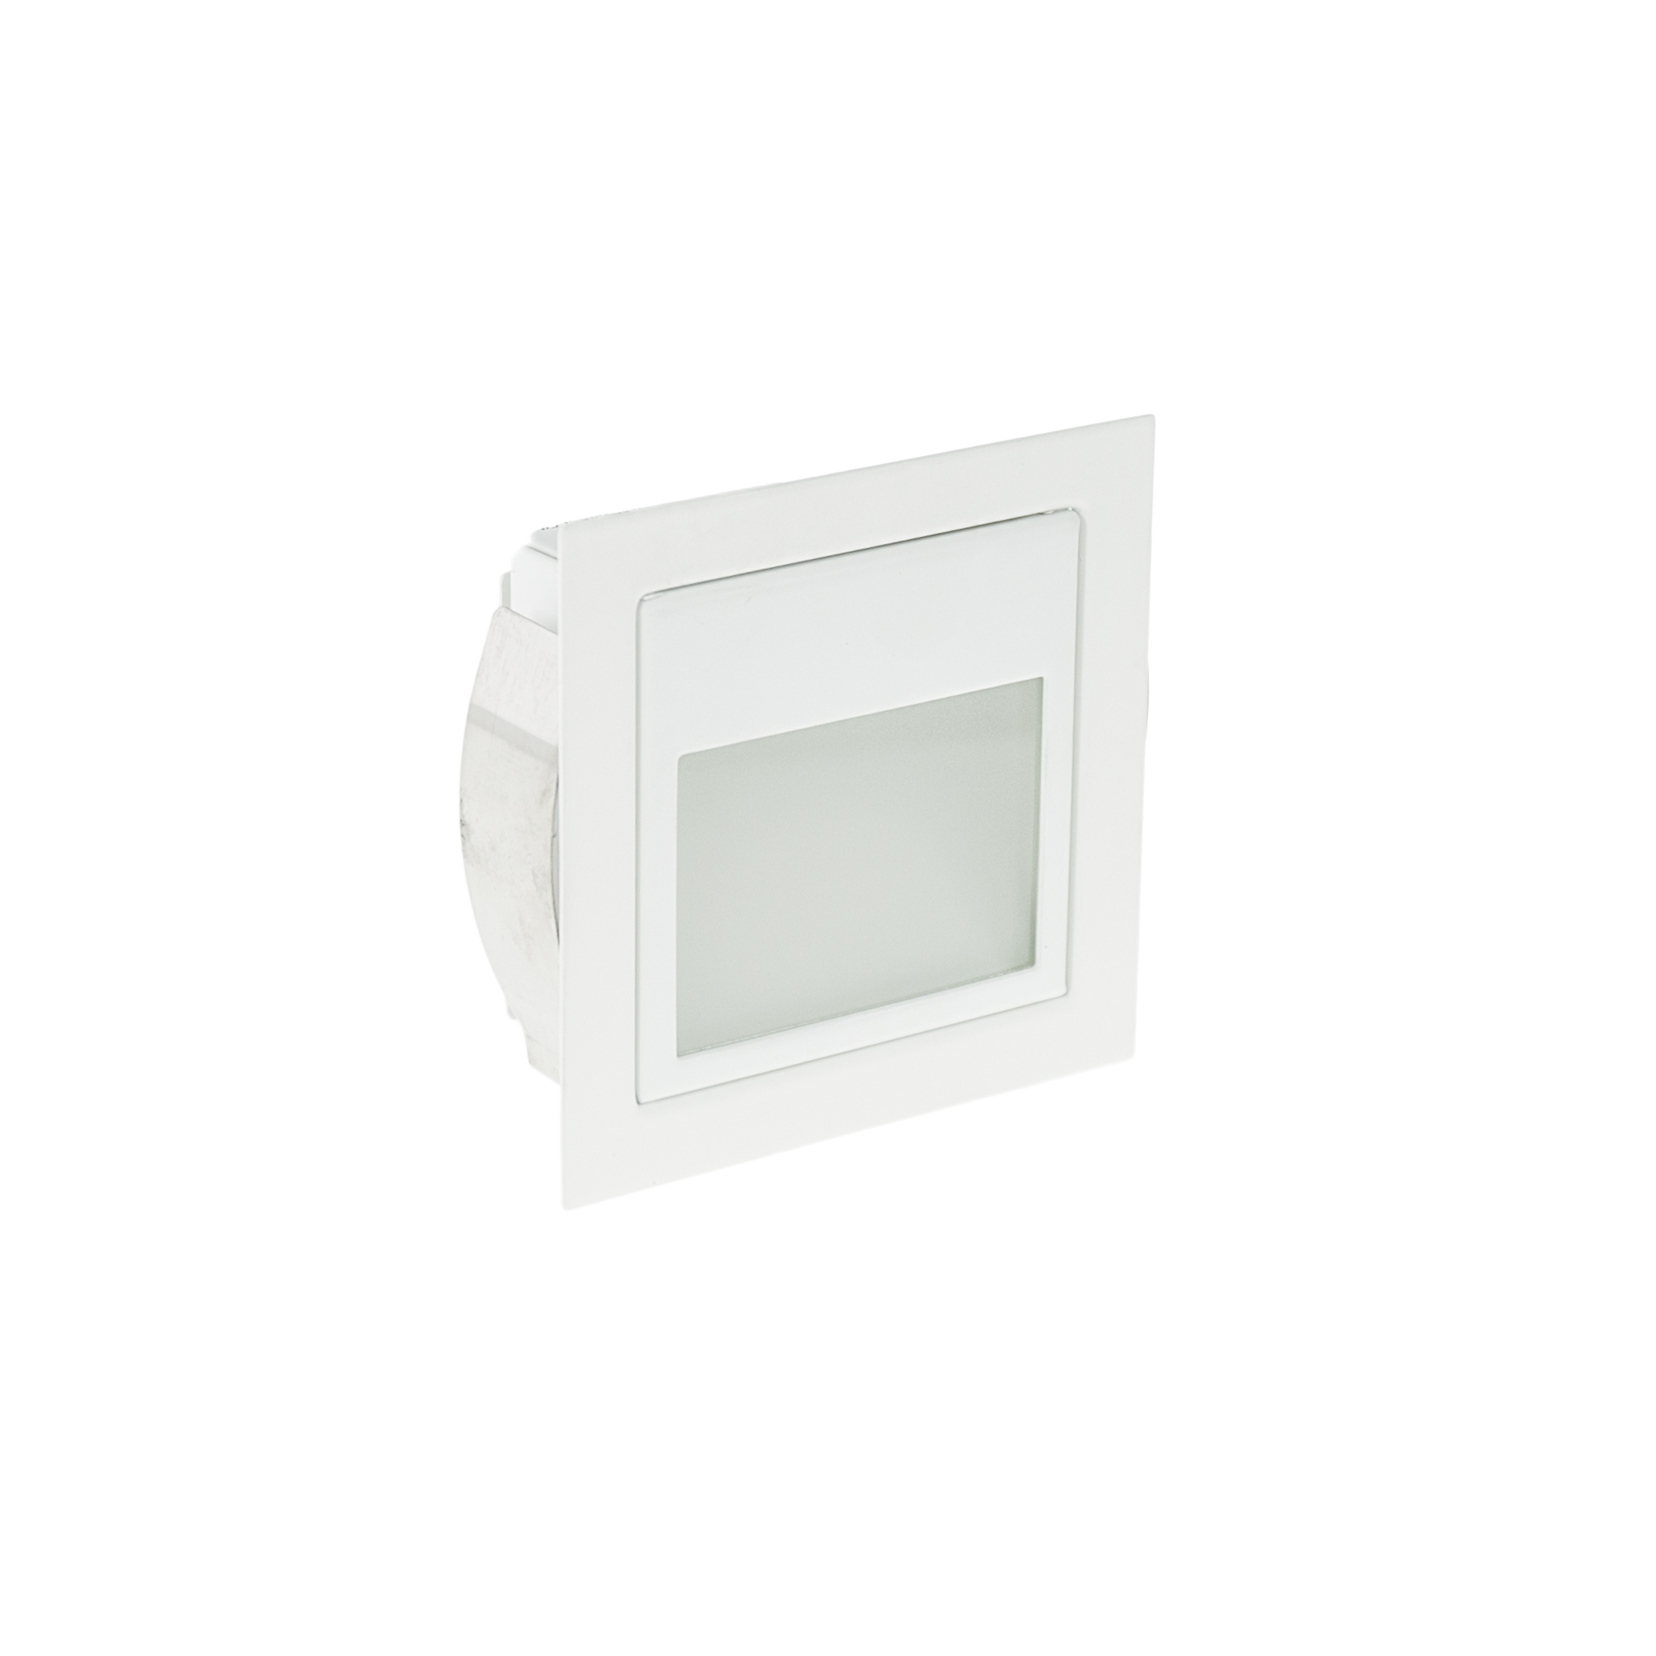 3W LED SQUARE LOW GLARE FROSTED GLASS EYELID WALL/STAIR LIGHT, 700mA CC,3000K, WHITE, IP20